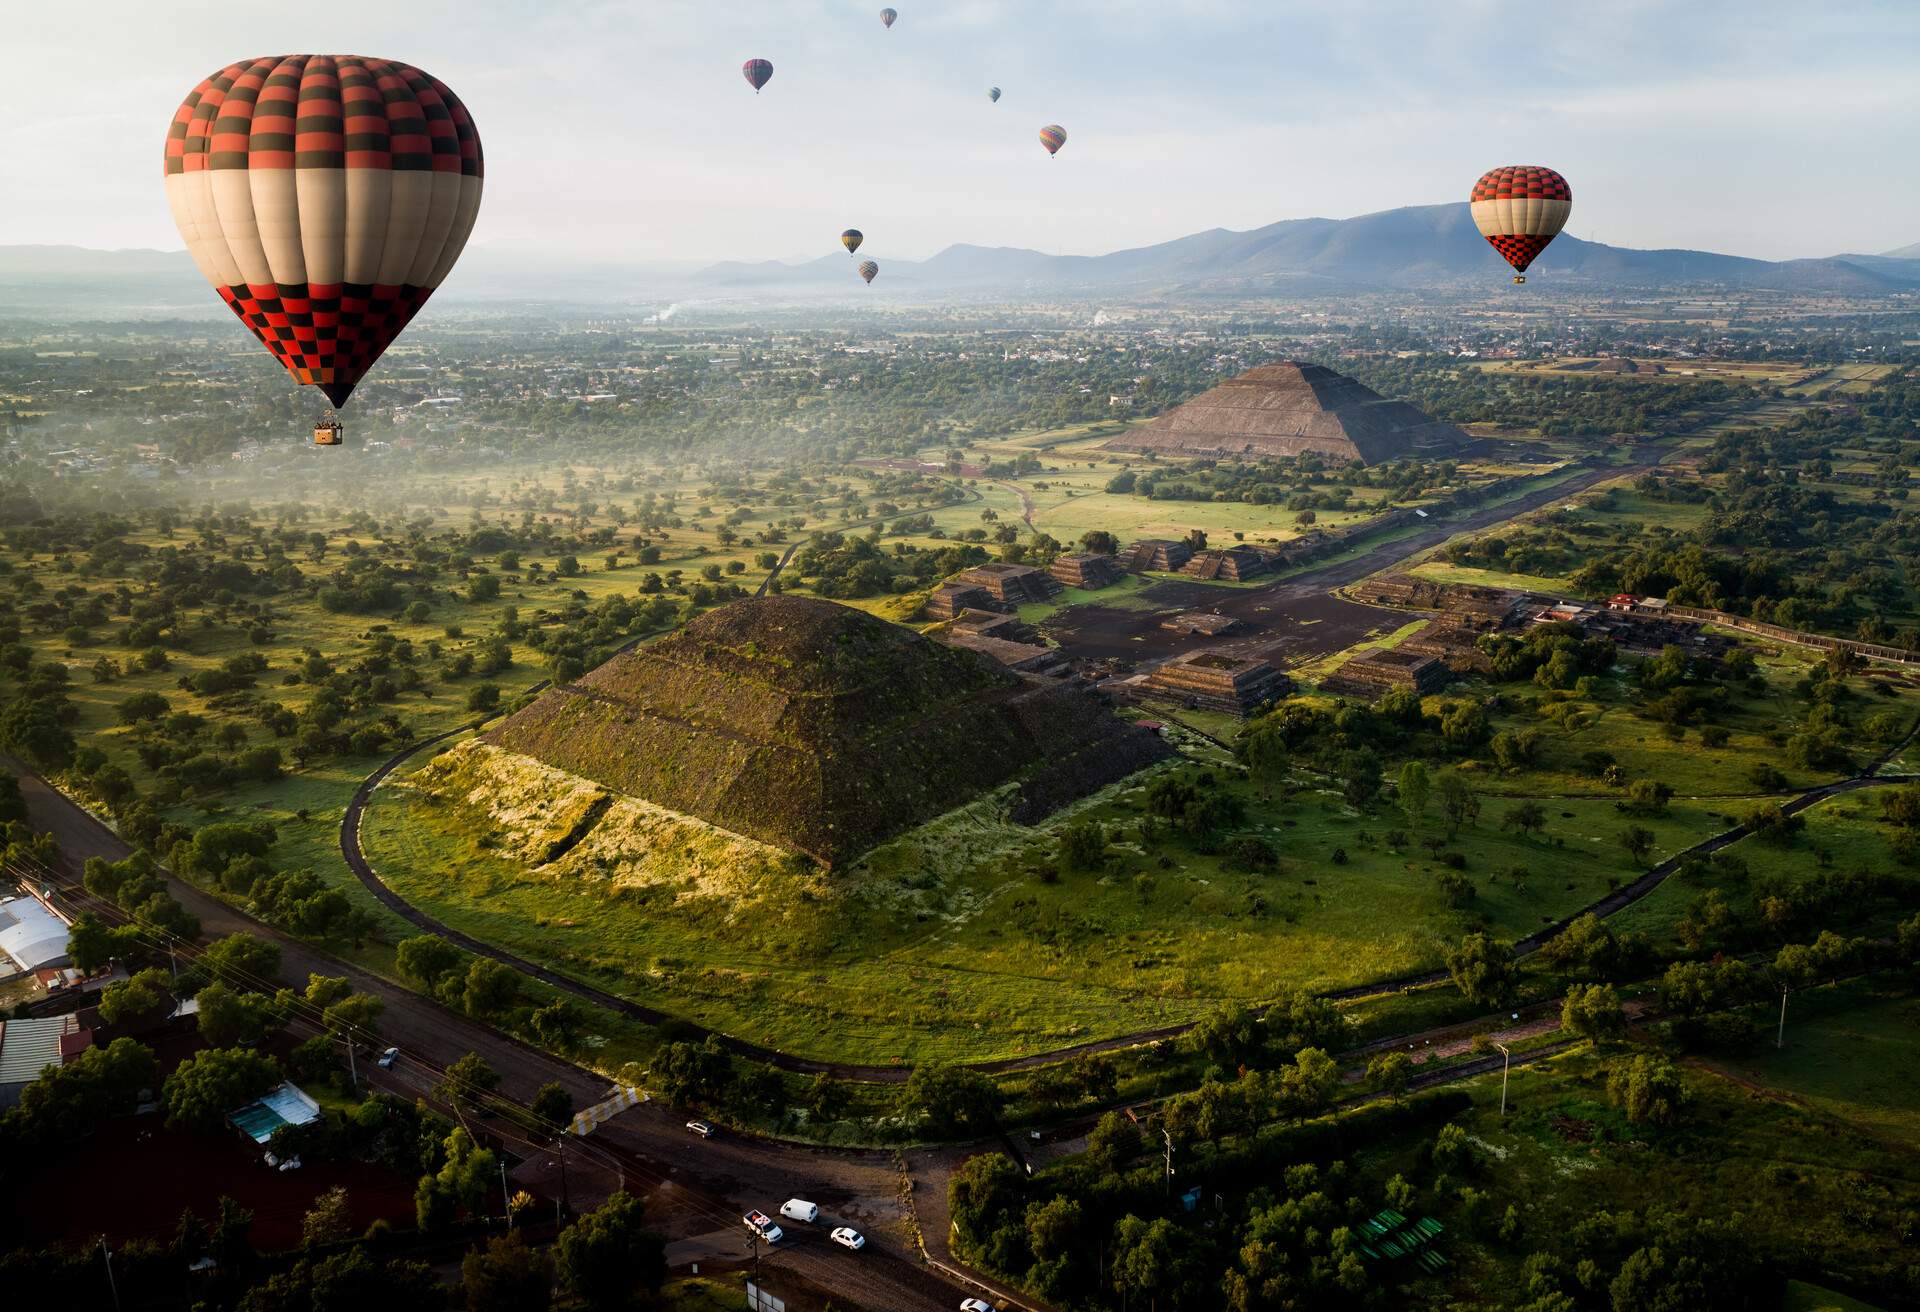 DEST_MEXICO_TEOTIHUACAN_PYRAMIDS_HOT-AIR-BALLOON_GettyImages-1194994165